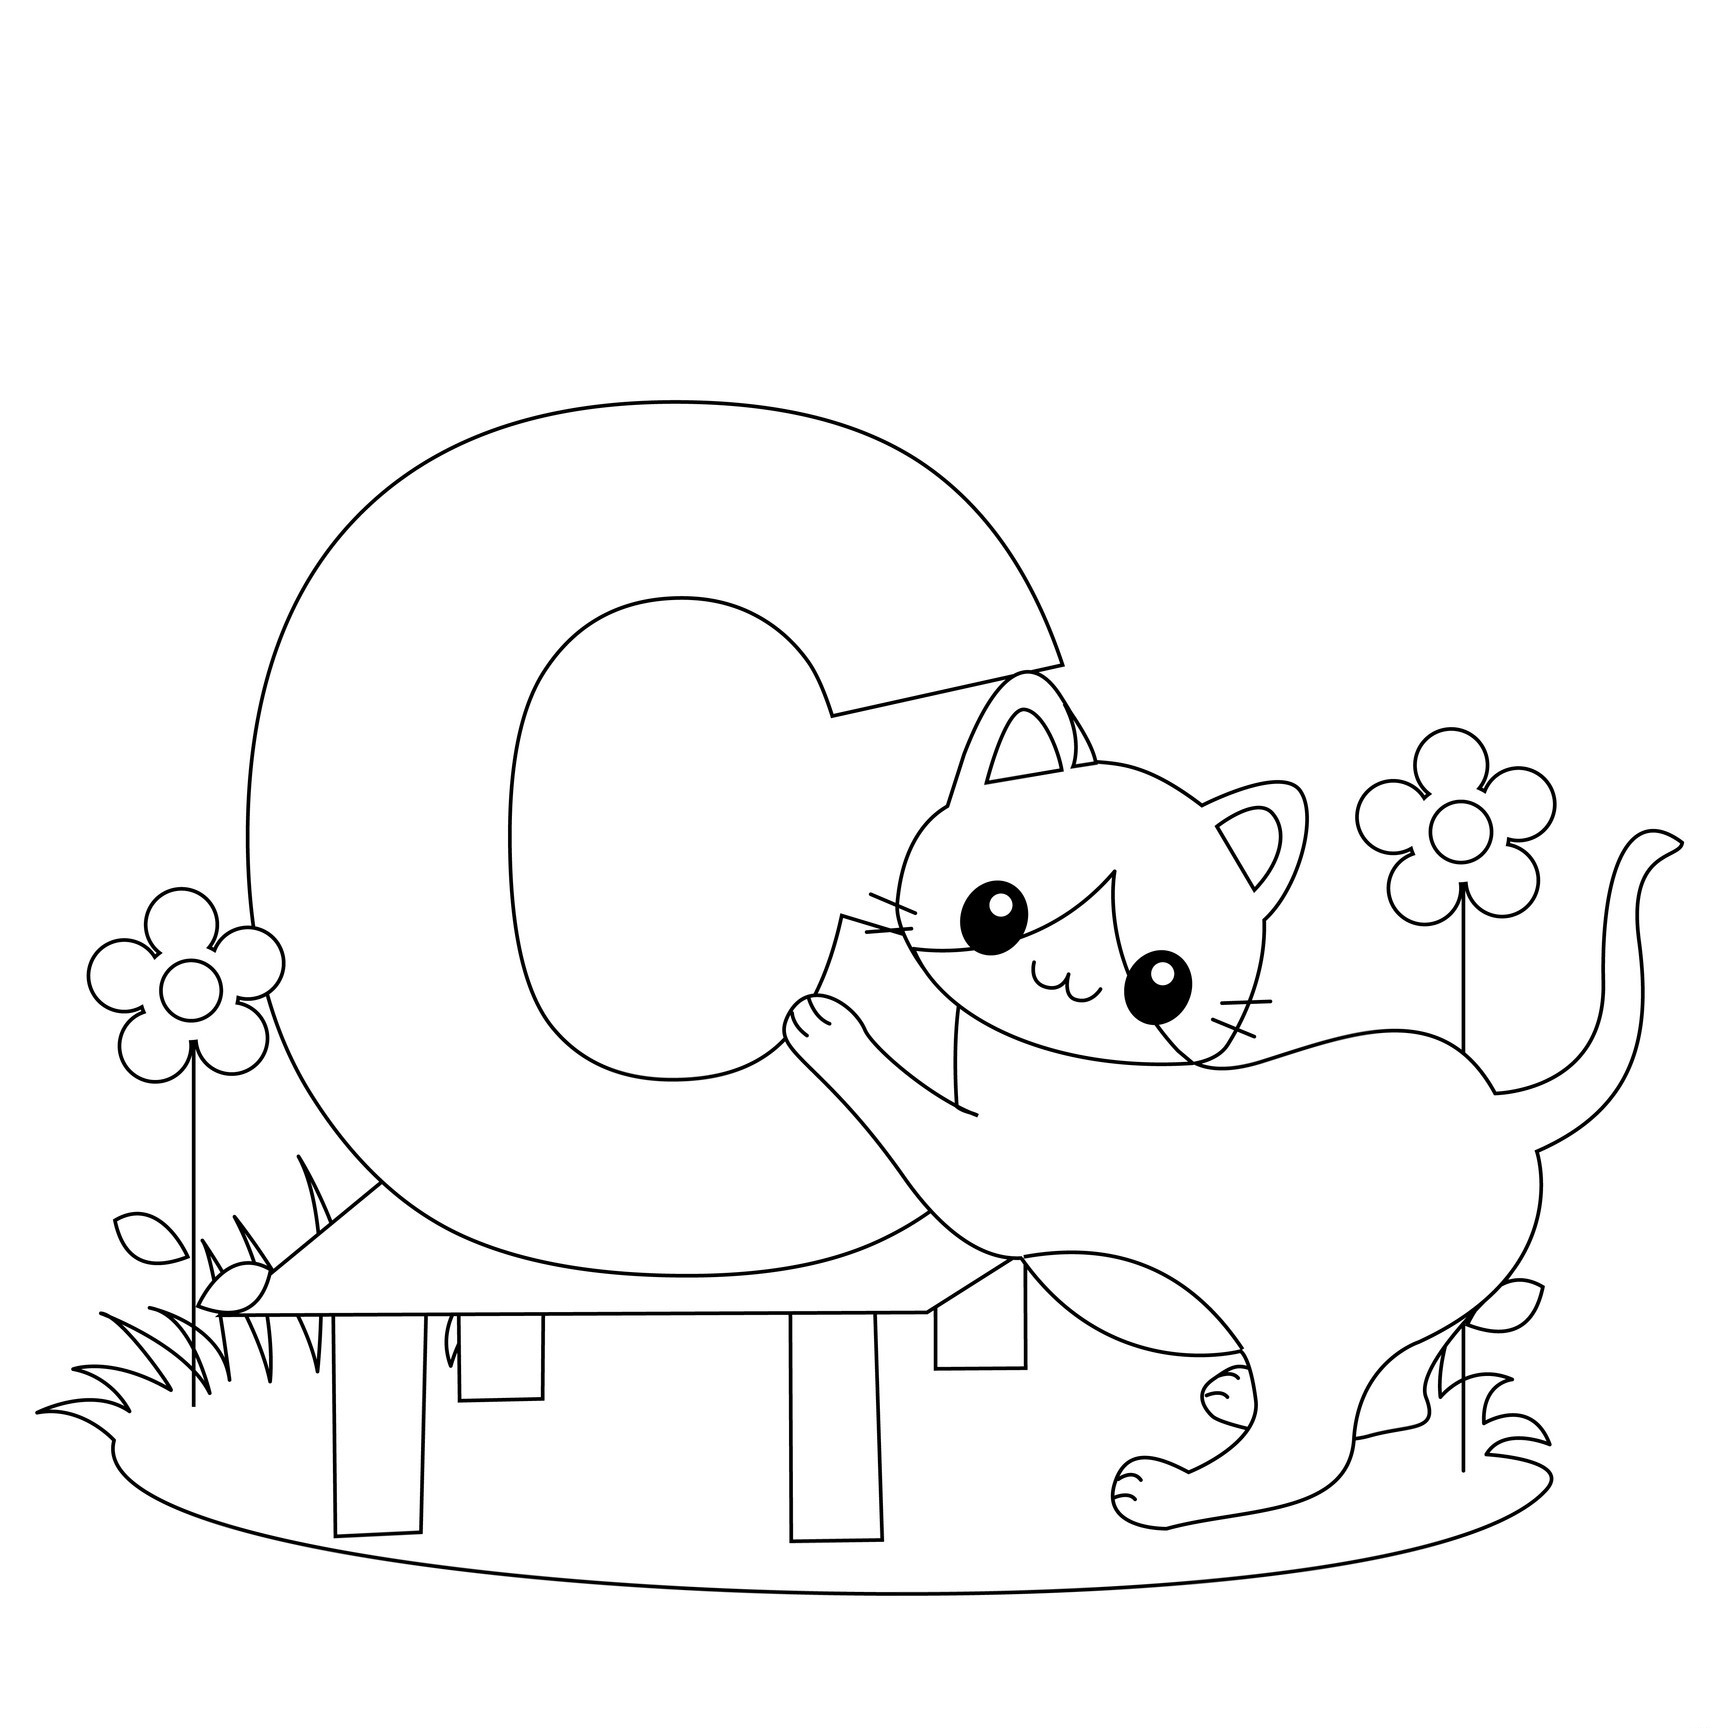 Big Coloring Pages For Adults At GetColorings Free Printable 